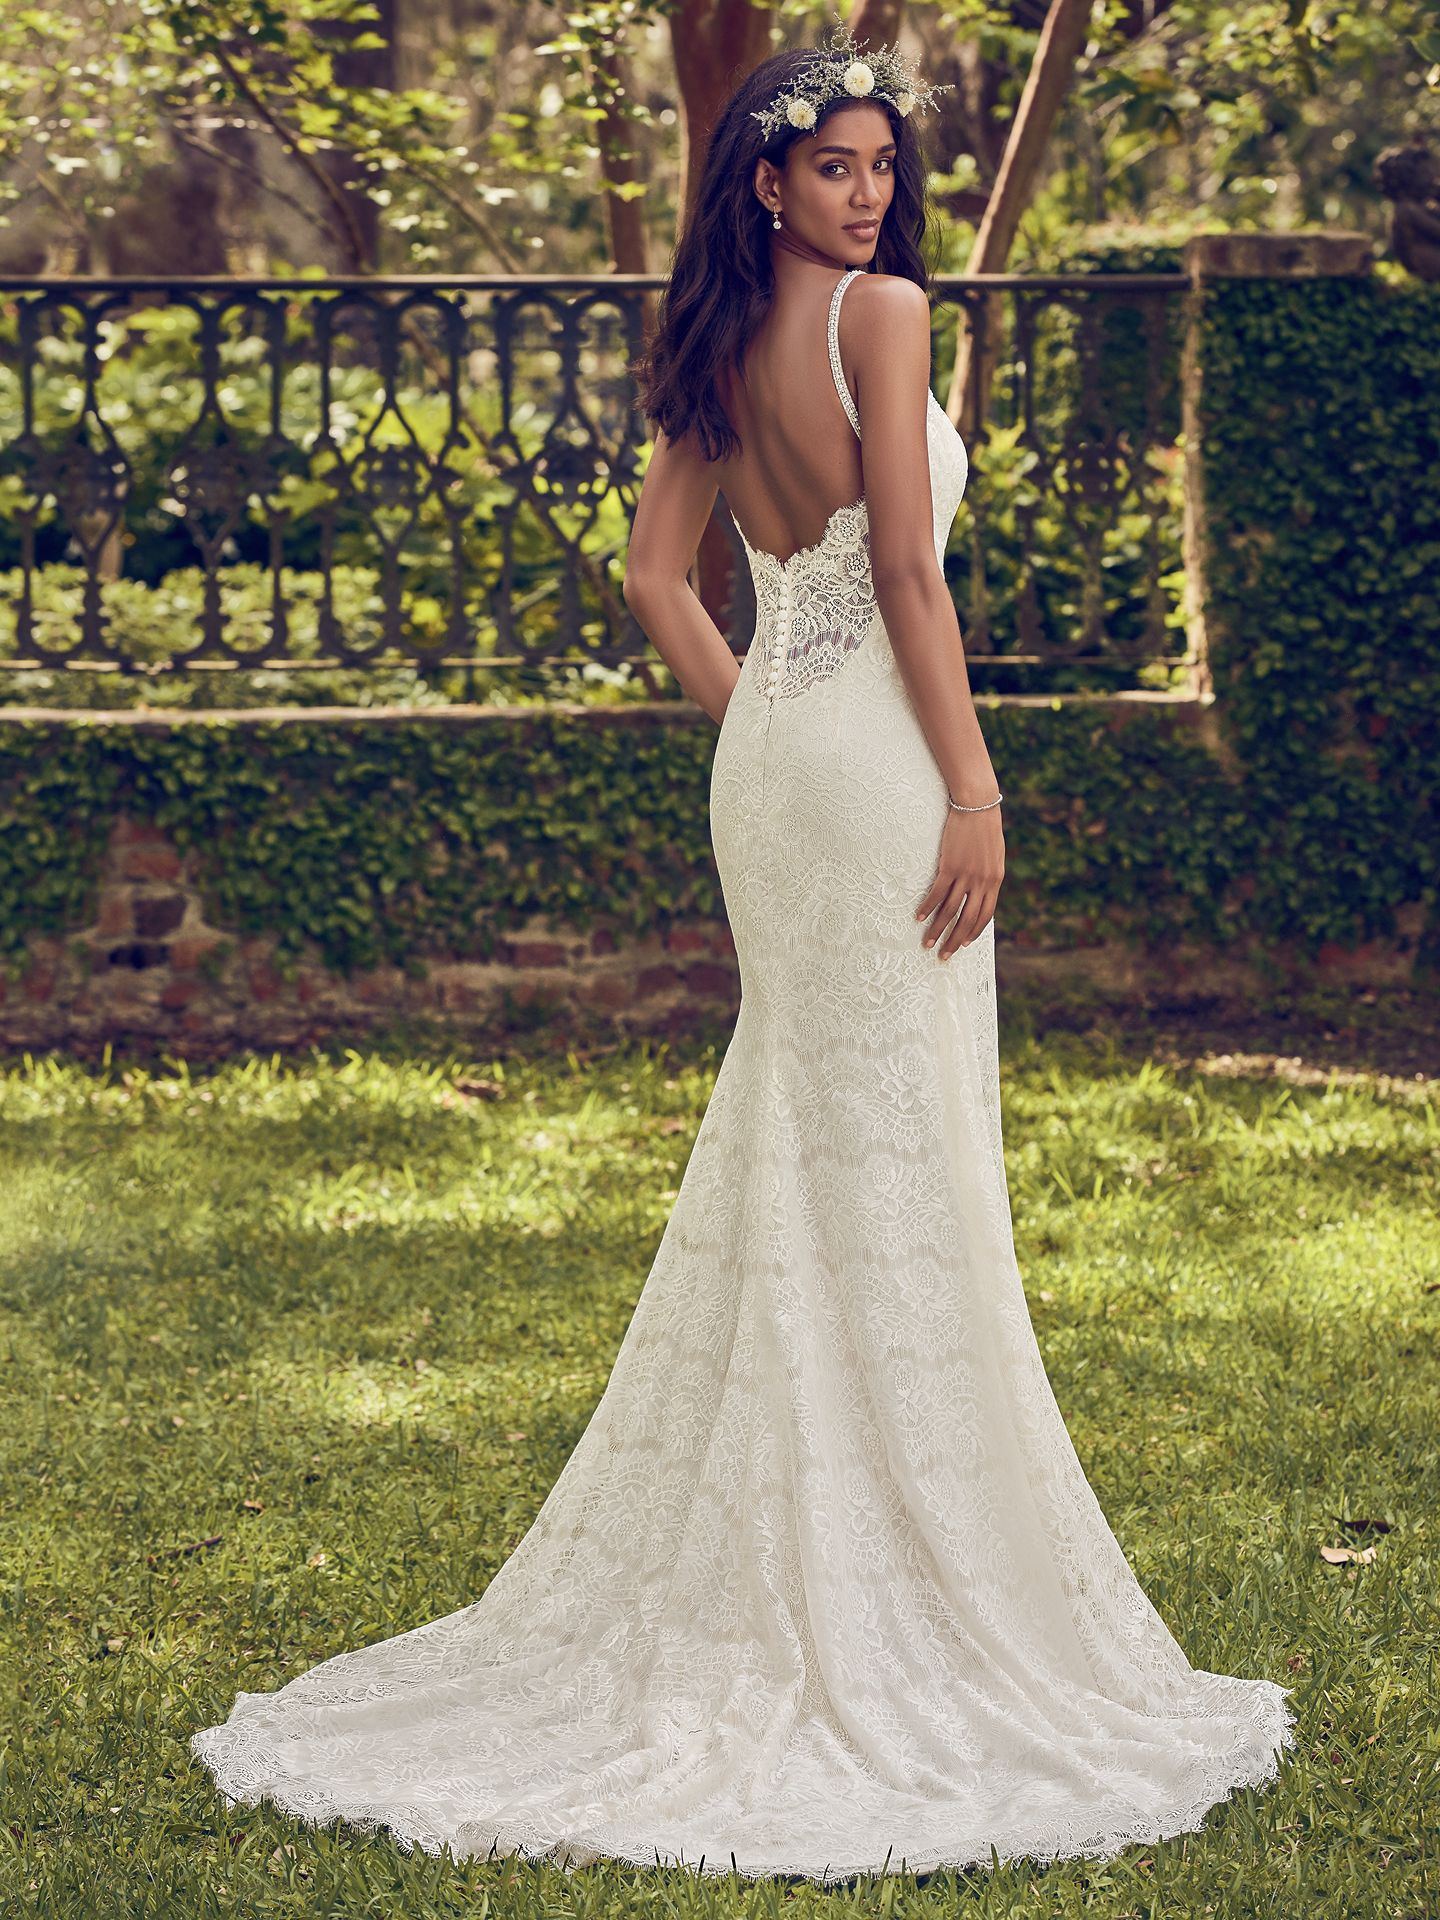 Dorian wedding dress features soft allover lace comprises this wedding dress, featuring illusion lace details along the plunging sweetheart neckline and scoop back. - The Latest Wedding Dress Trends for Engagement Season 2018